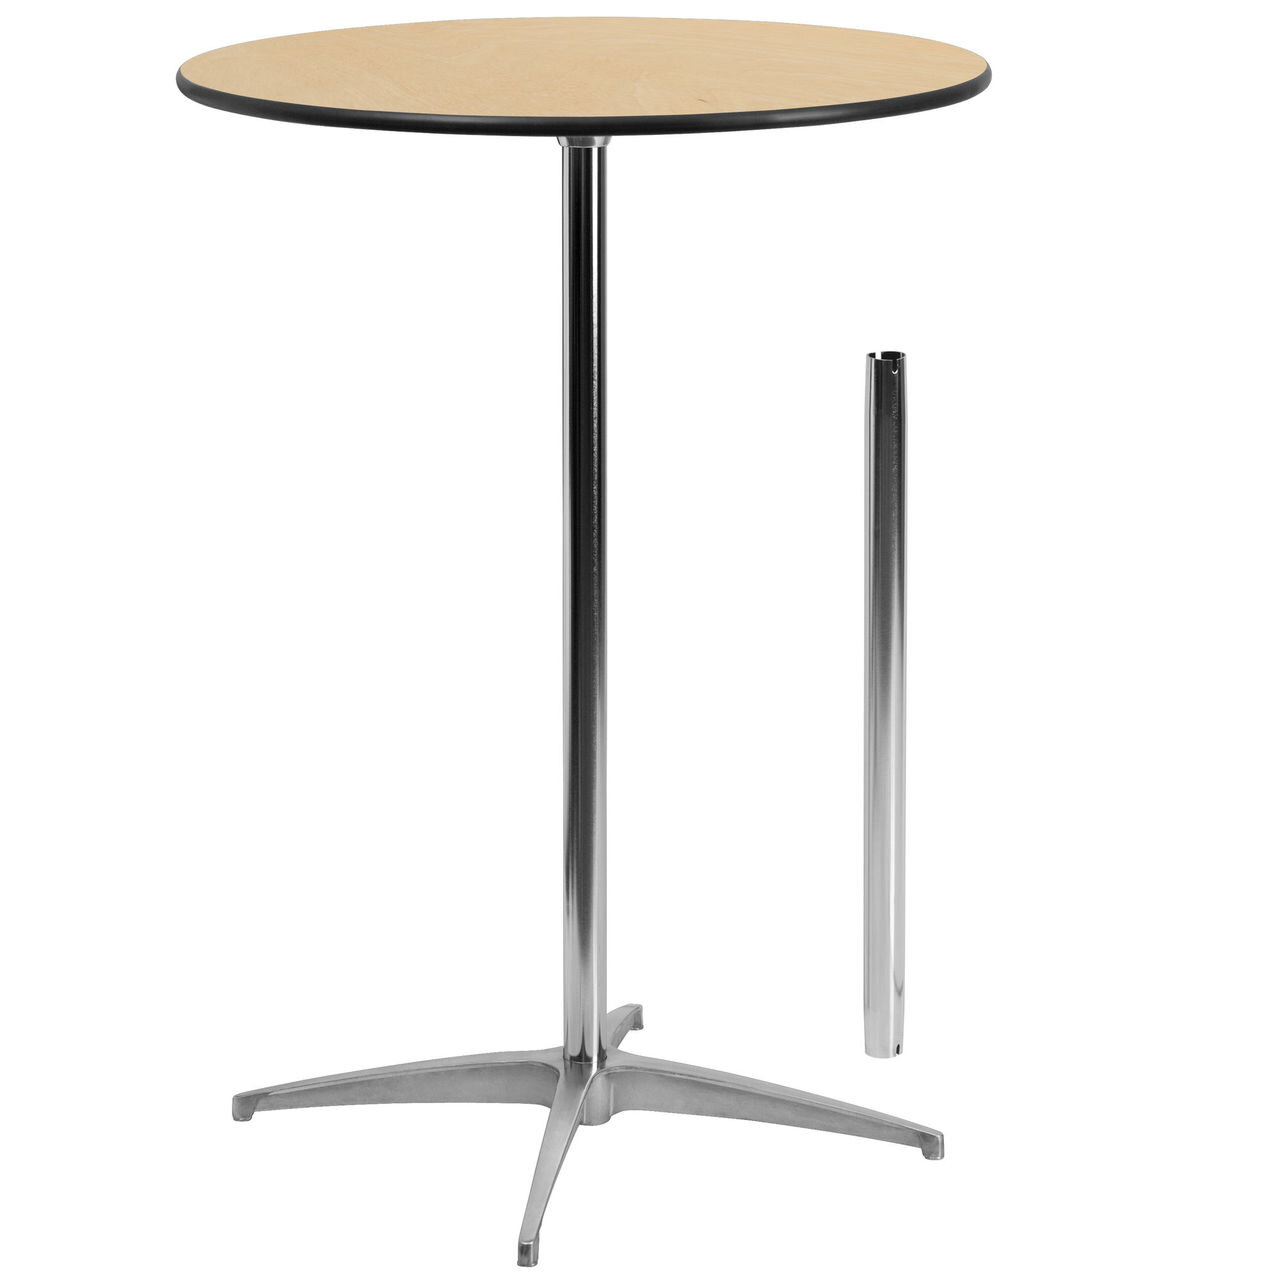 30in Round Cocktail Table $12.50